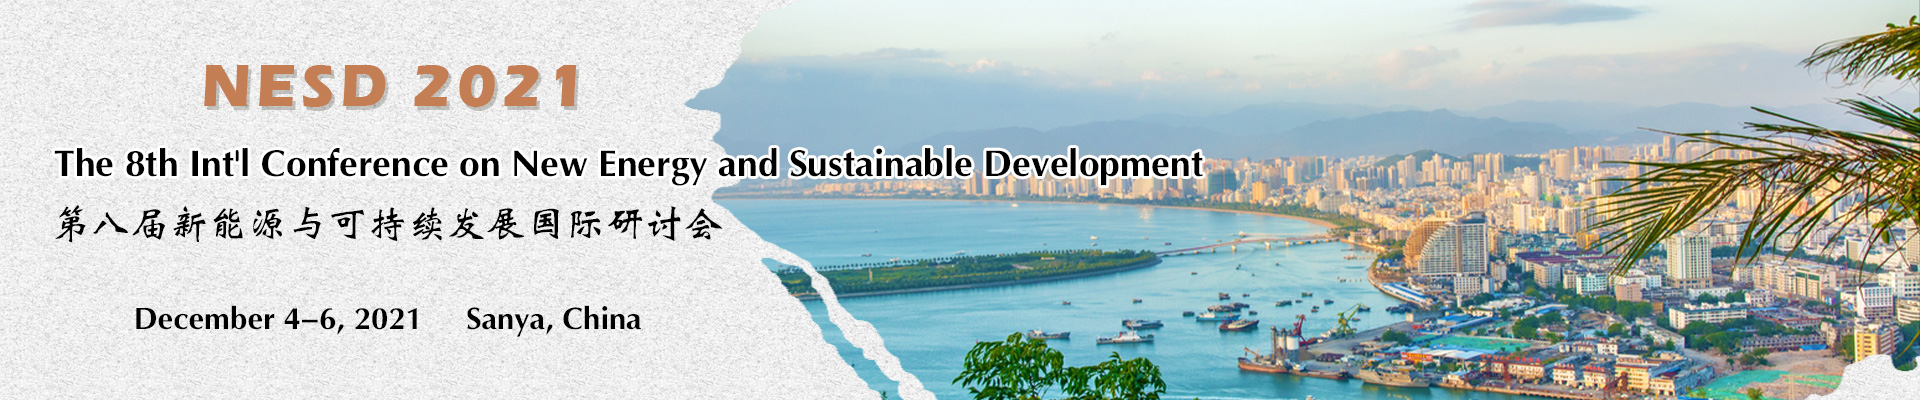 The 8th Int'l Conference on New Energy and Sustainable Development (NESD 2021), Sanya, Hainan, China